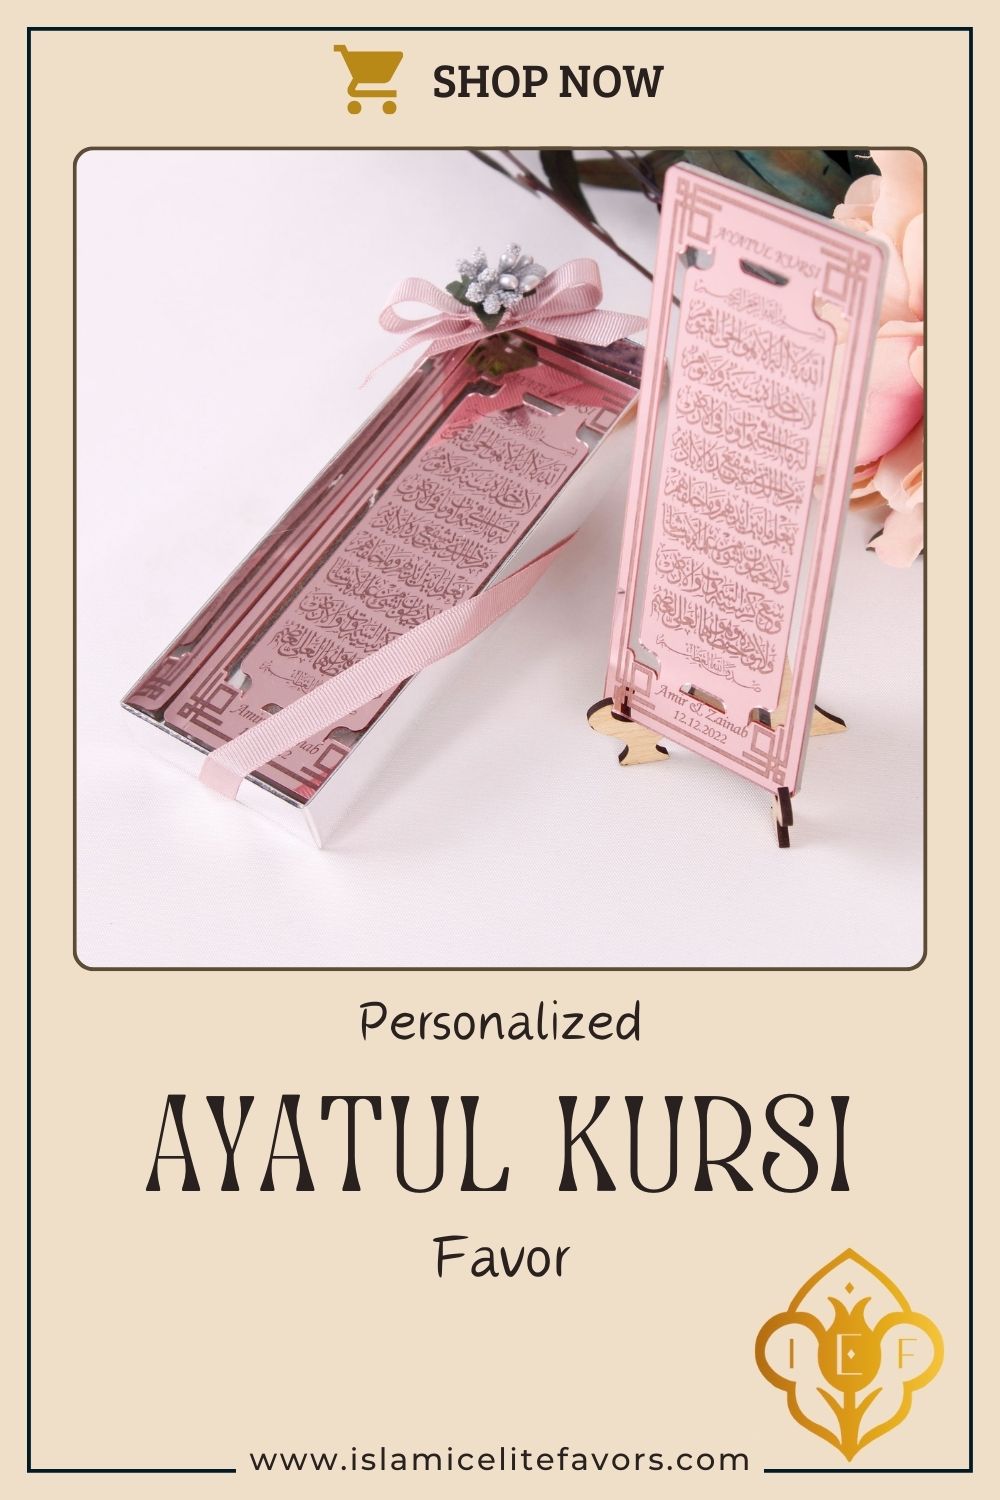 Personalized Wedding Favor Ayatul Kursi on Stand Rose Gold Clear Plexi - Islamic Elite Favors is a handmade gift shop offering a wide variety of unique and personalized gifts for all occasions. Whether you're looking for the perfect Ramadan, Eid, Hajj, wedding gift or something special for a birthday, baby shower or anniversary, we have something for everyone. High quality, made with love.